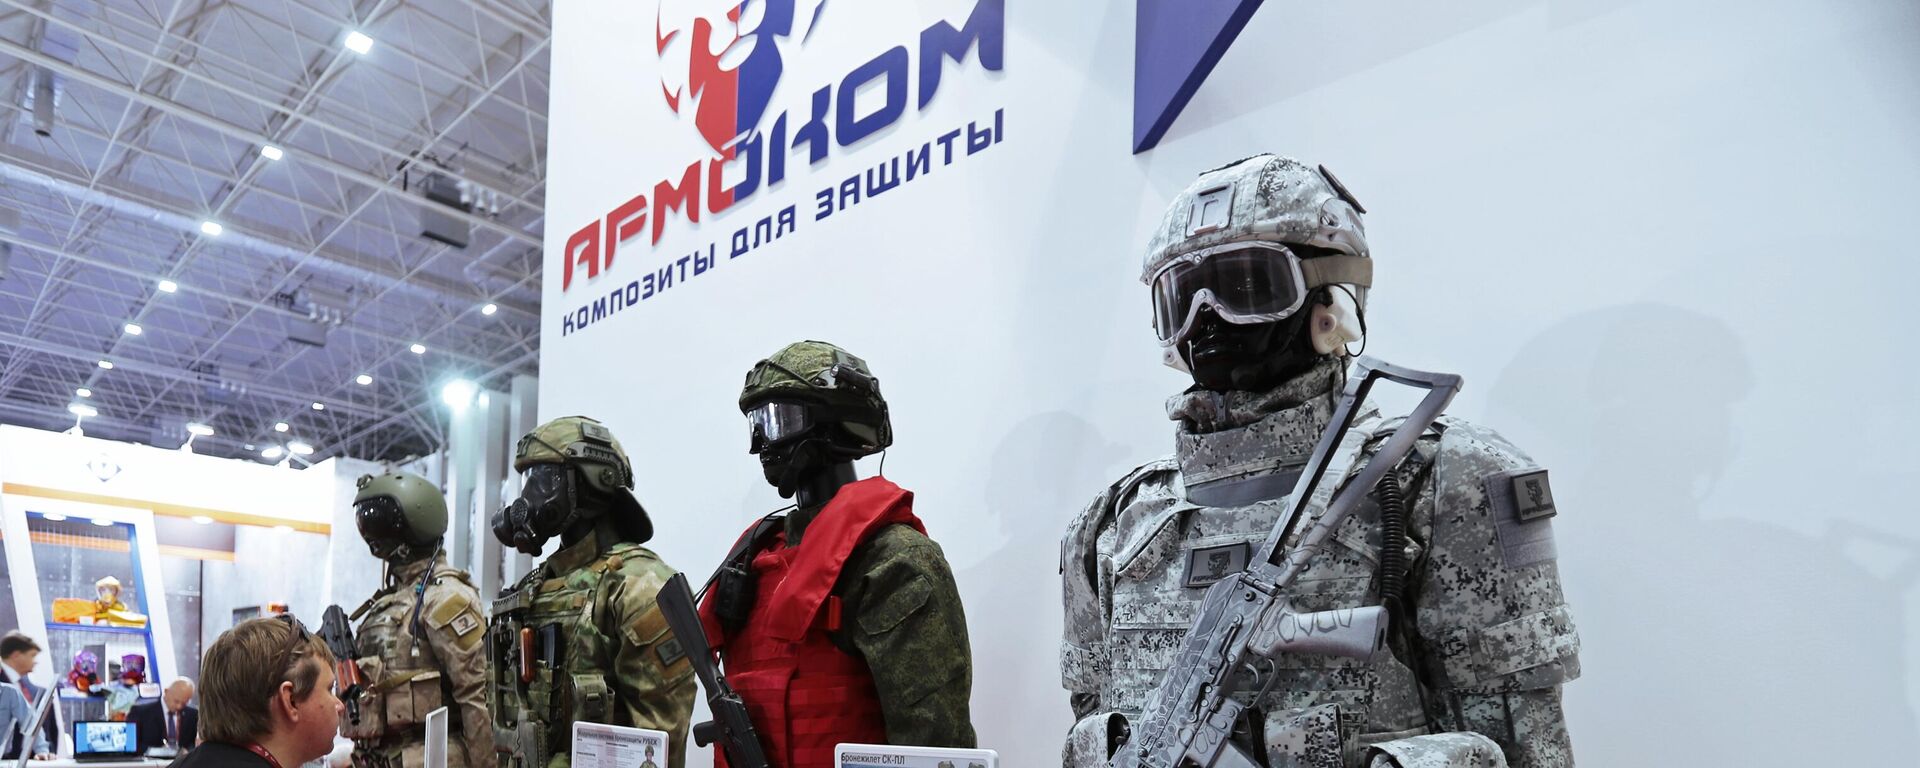 A visitor examines personal protective equipment at the exhibition held during the 4th international military and technical forum Army 2018 held at the Patriot Congress and Exhibition Center in Kubinka. - Sputnik International, 1920, 14.11.2022